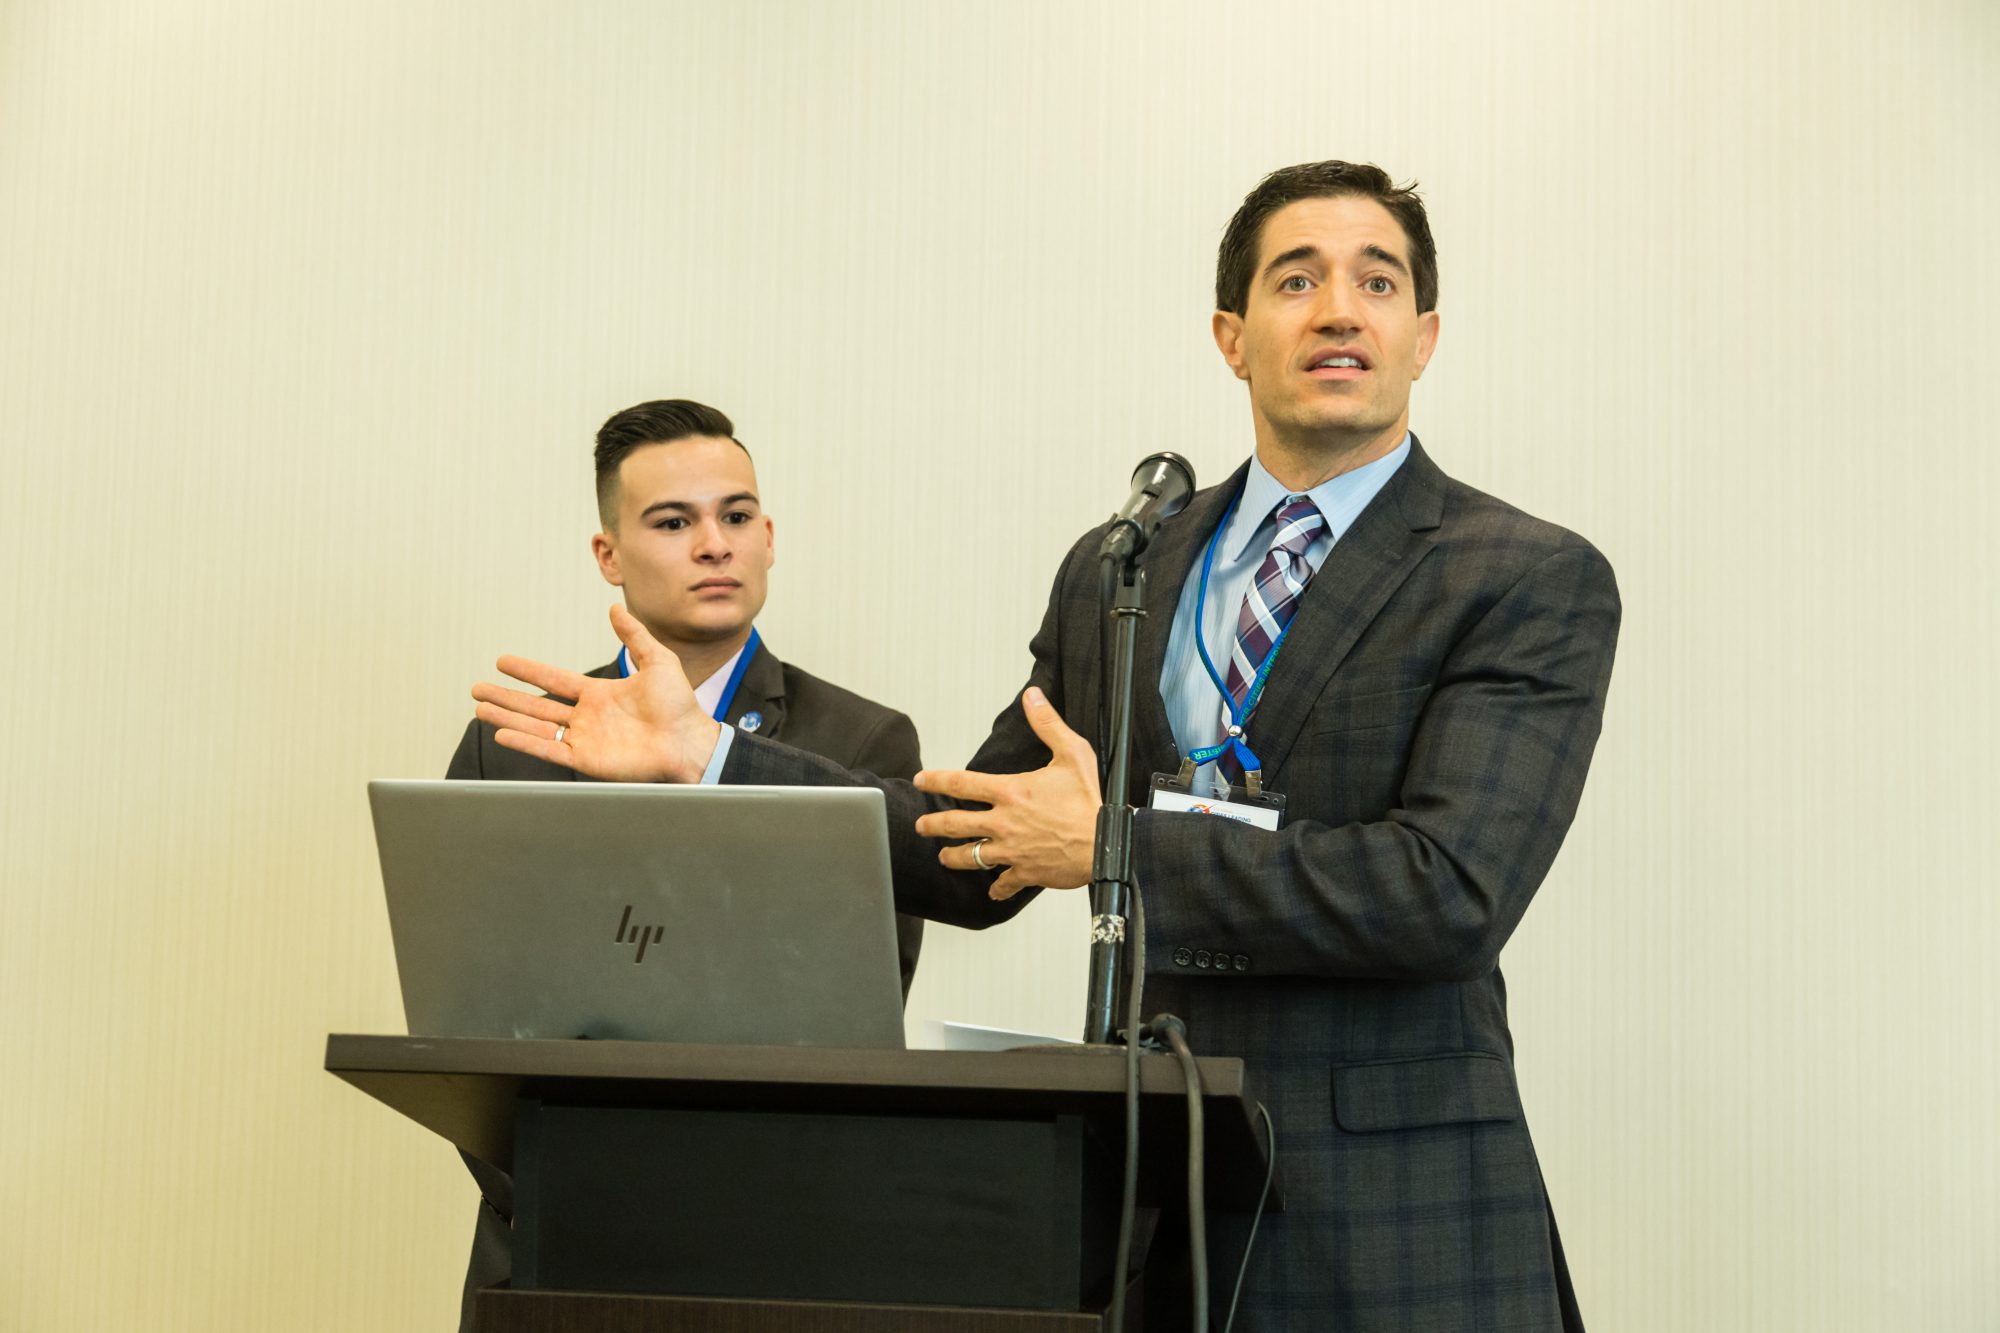 Carlo Capua and Jason Tatman Welcome Attendees to the NextGen Track